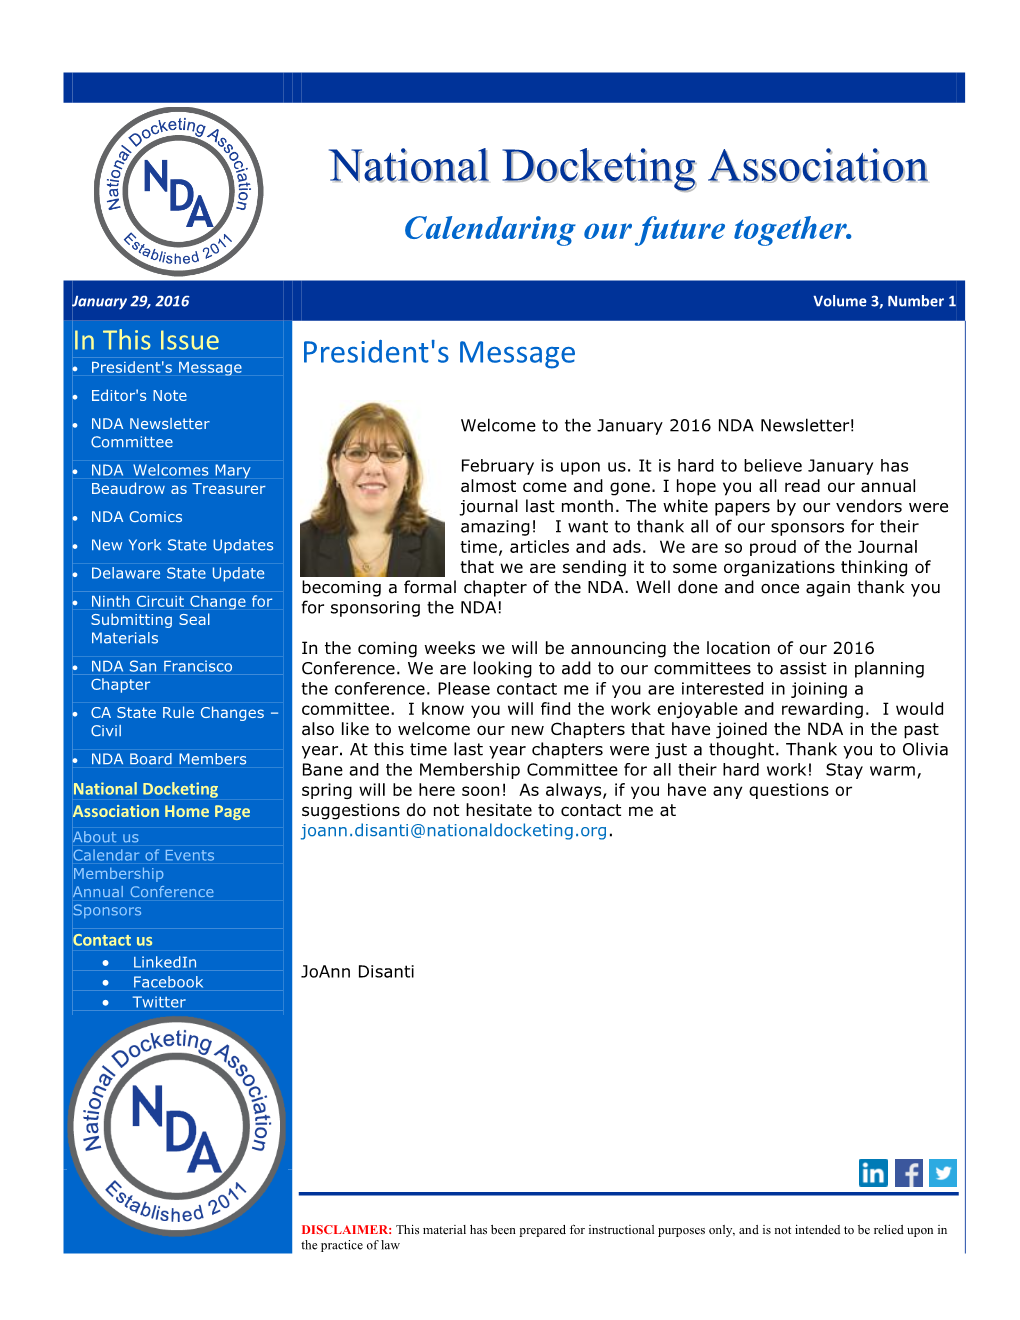 National Docketing Association Home Page About Us William Mckay Calendar of Events